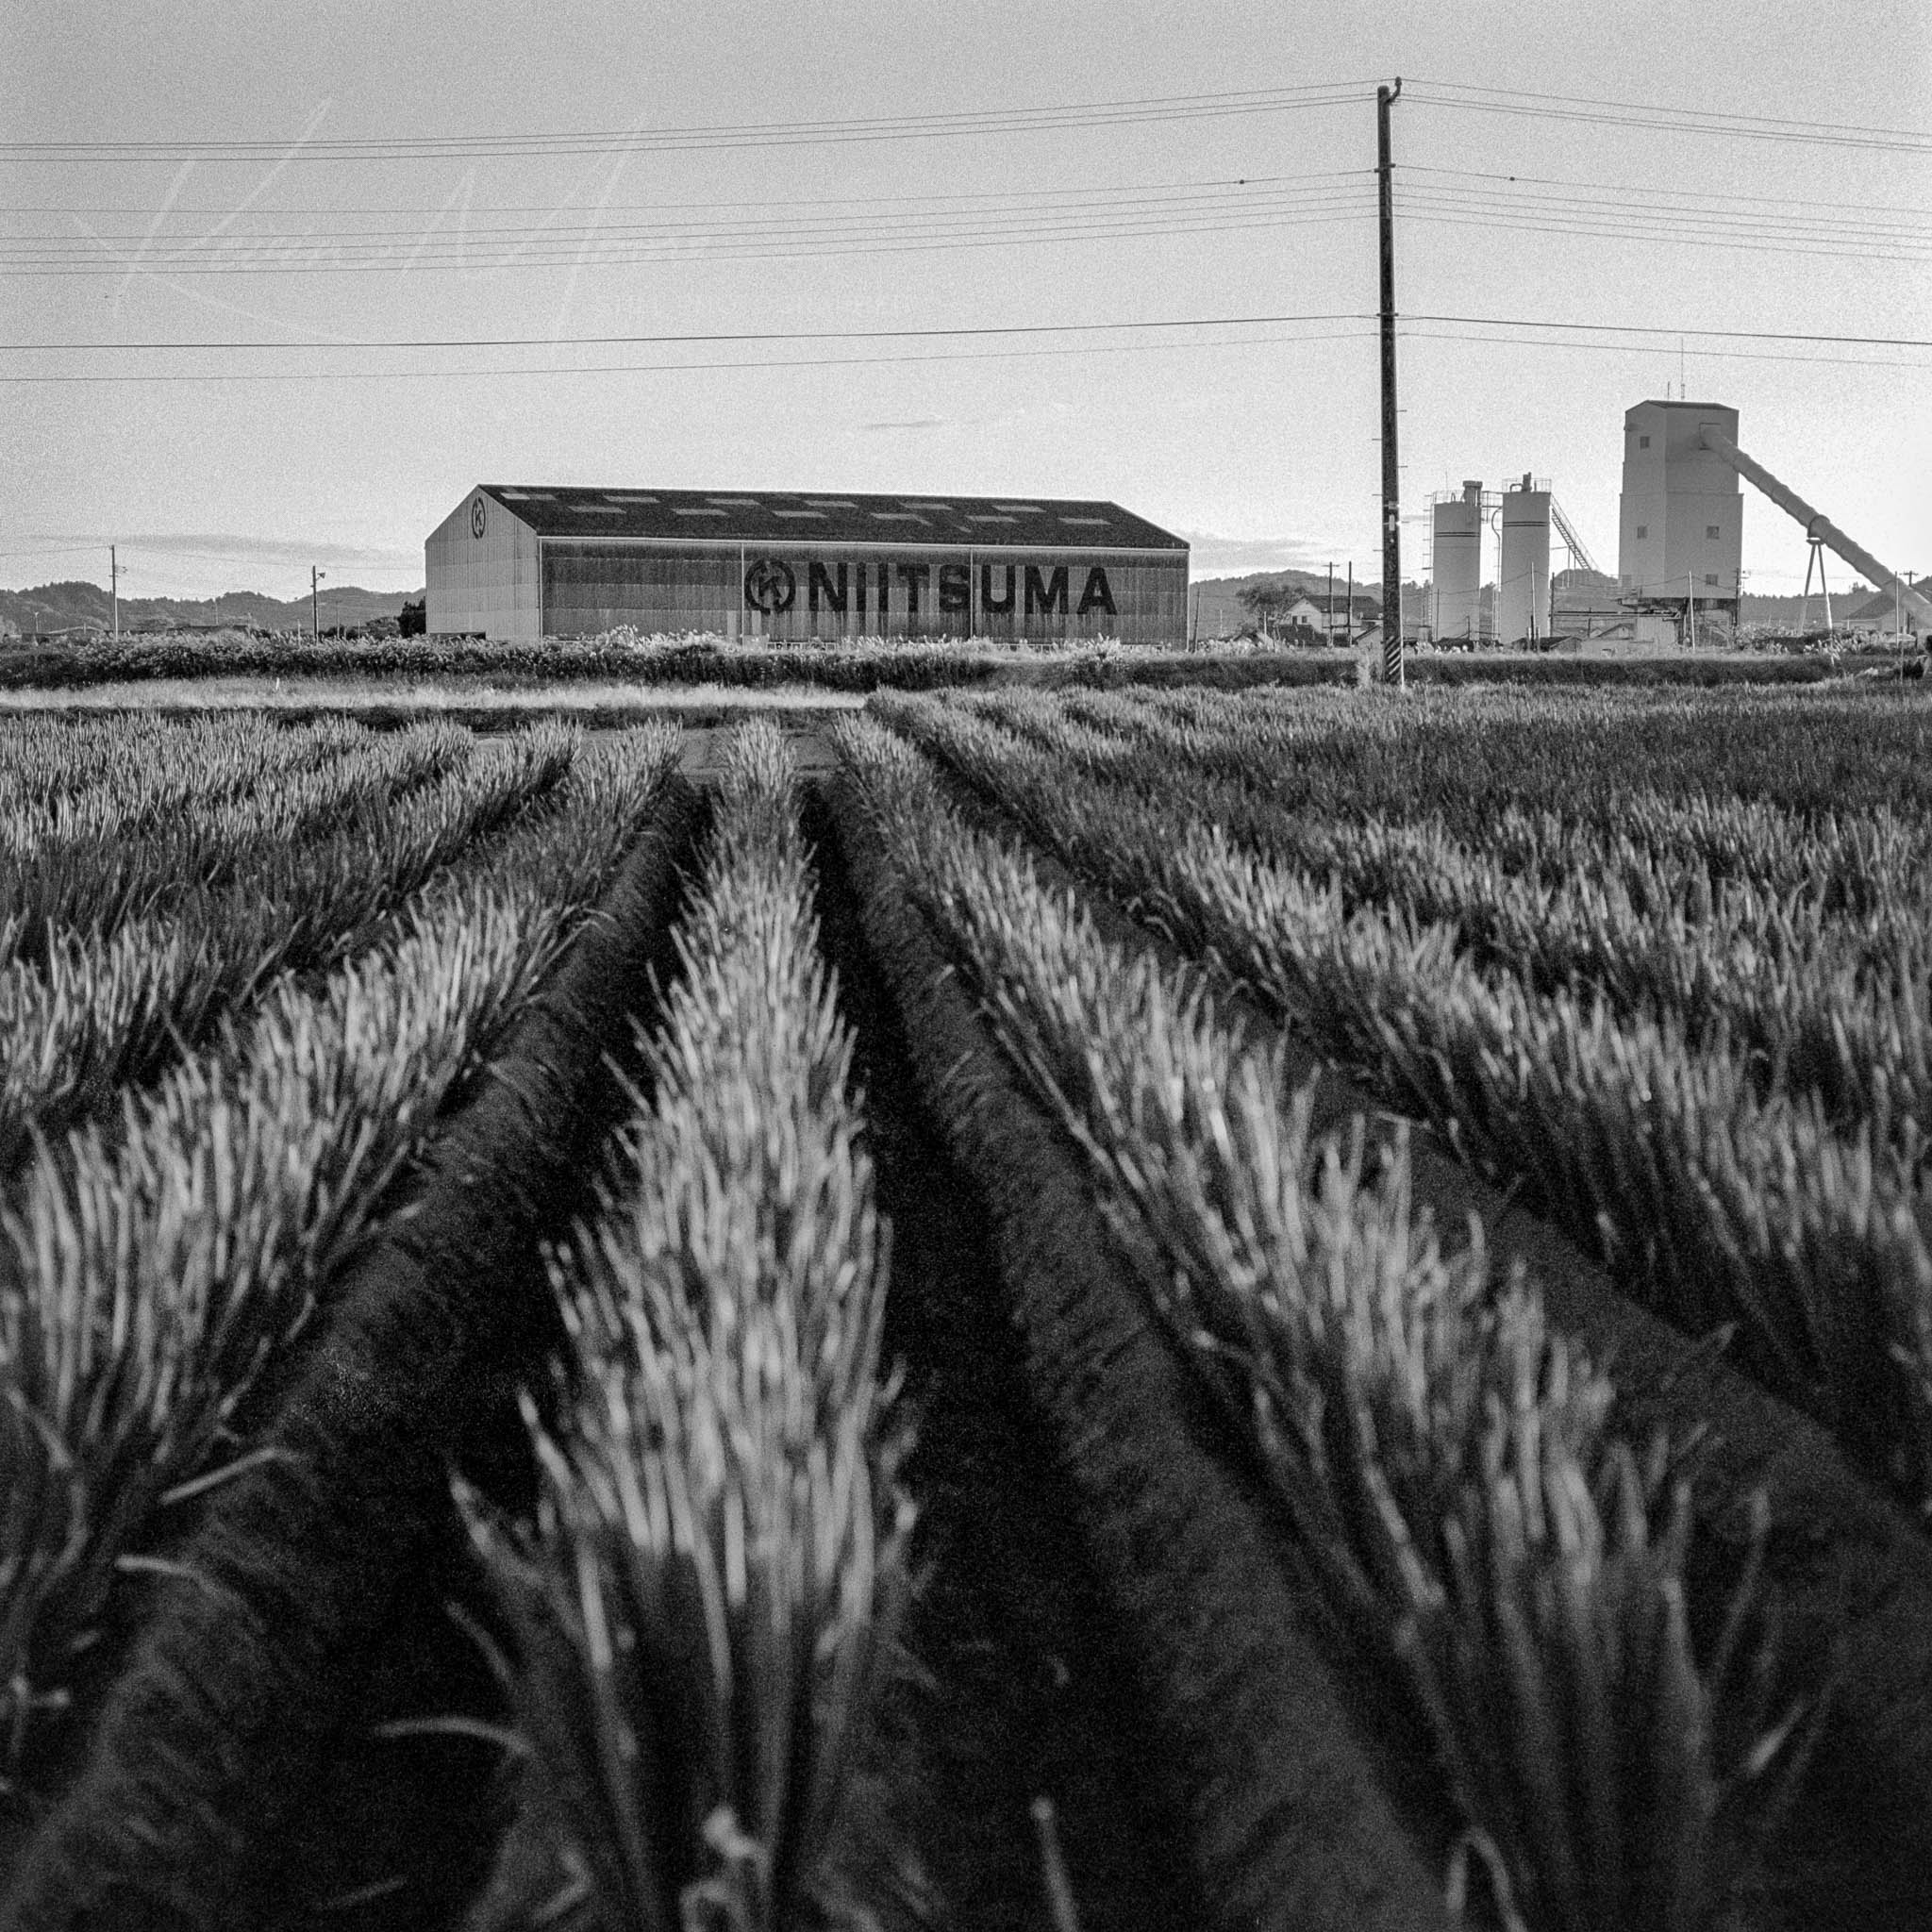 Vintage black and white image of Nittsuma agricultural building in mid-20th century grain field landscape.